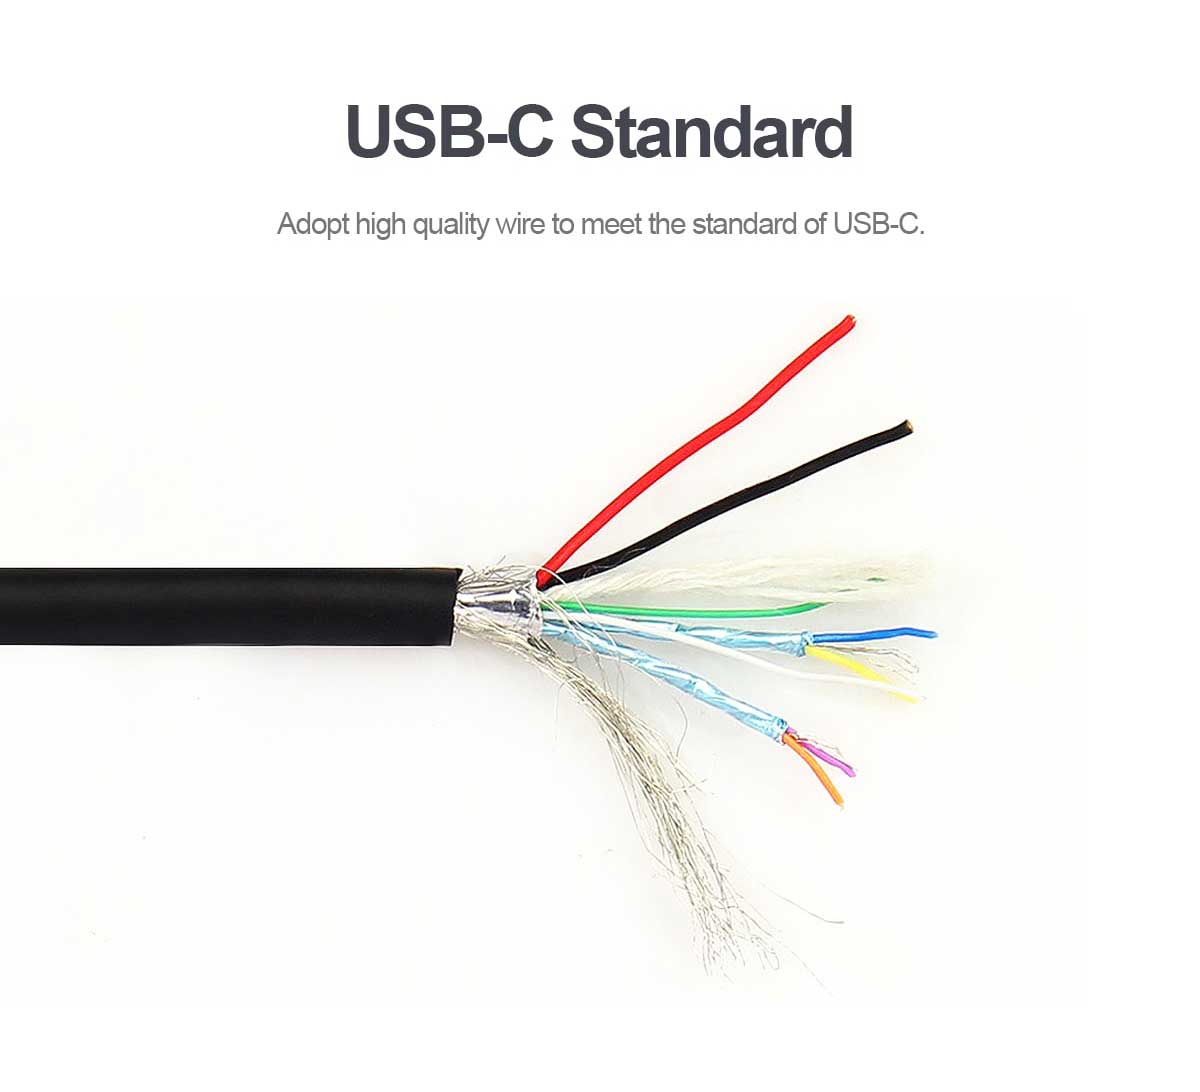 USB-C Standard. Adopt high quality wire to meet the standard of USB-C